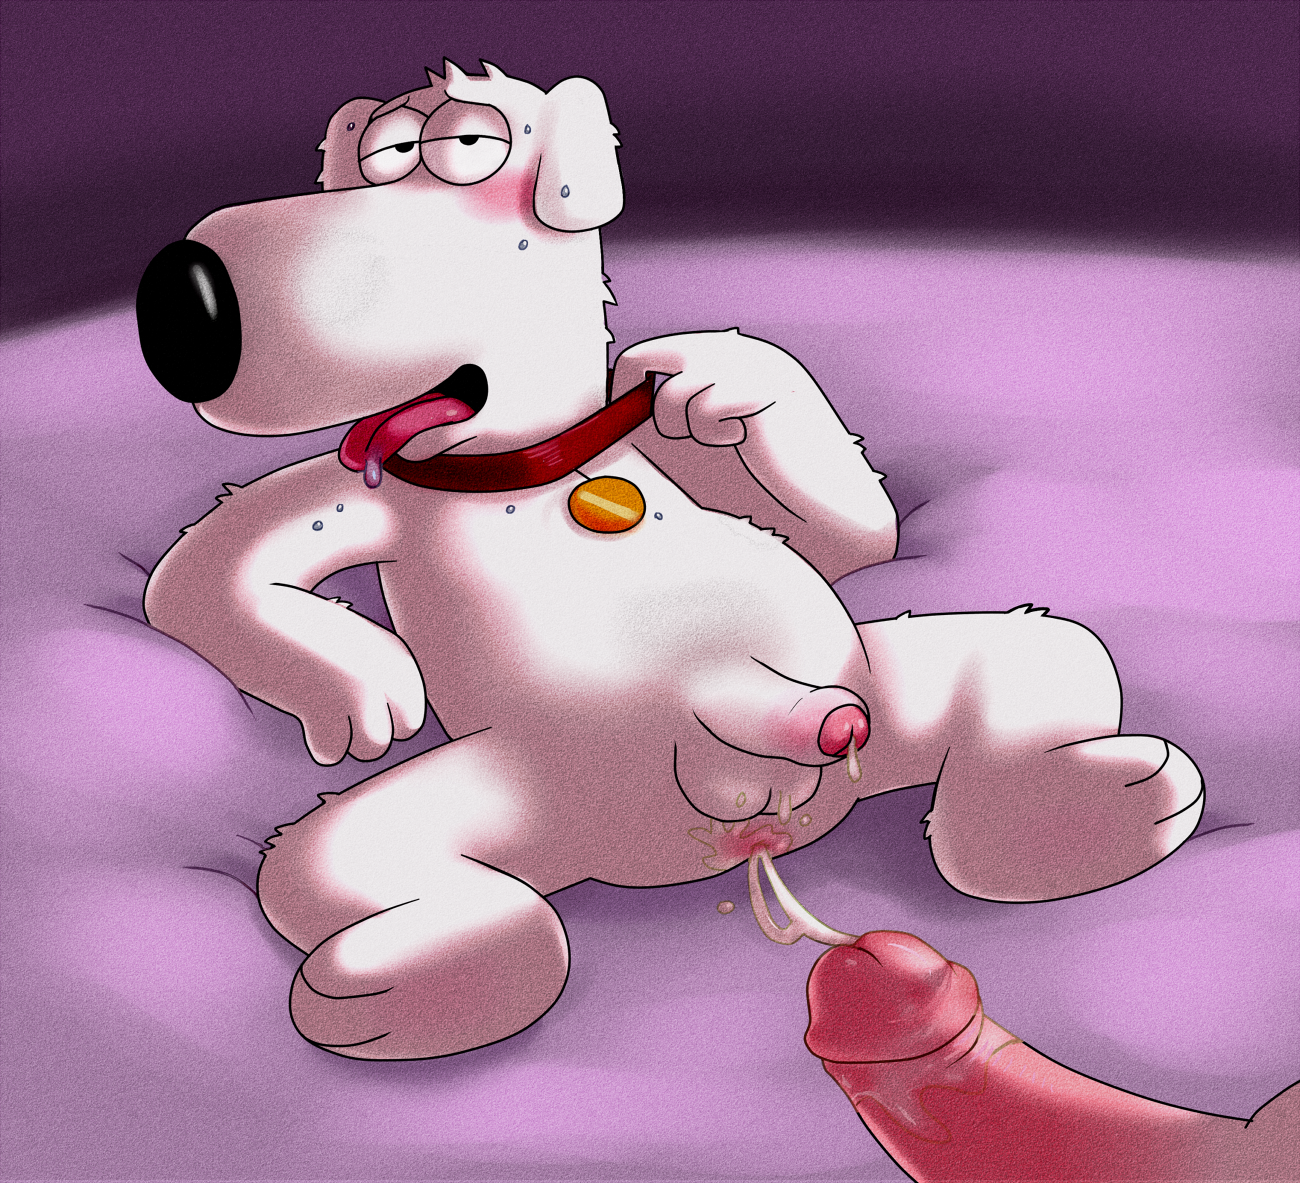 Brian griffin rule 34